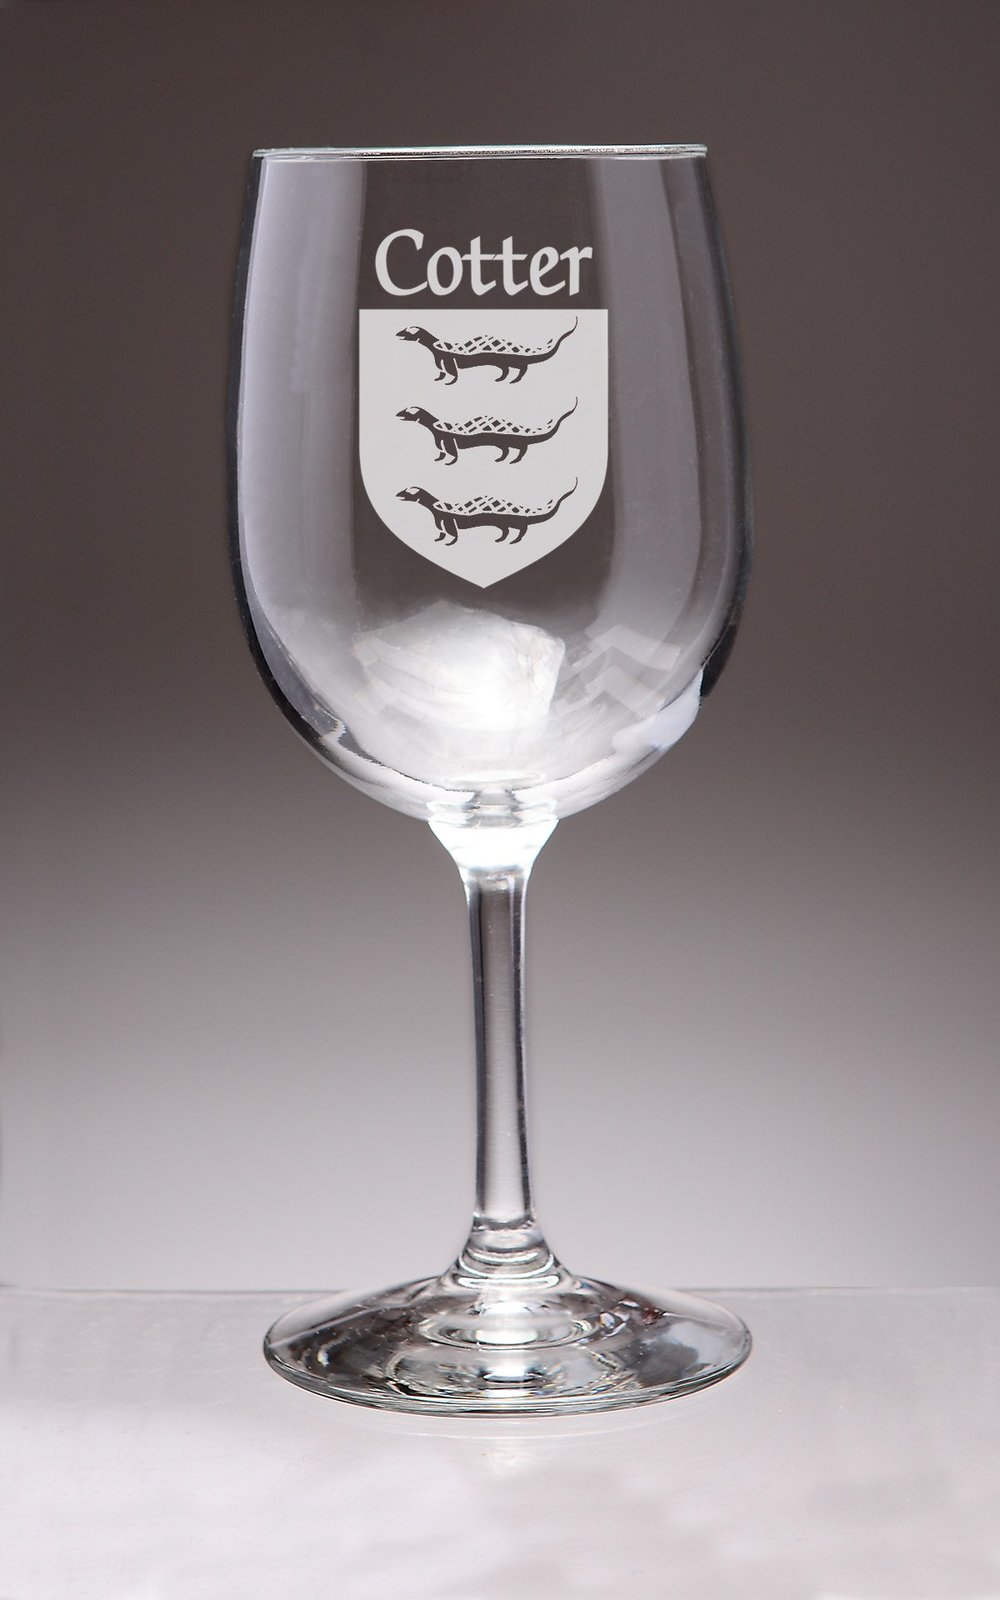 Primary image for Cotter Irish Coat of Arms Wine Glasses - Set of 4 (Sand Etched)